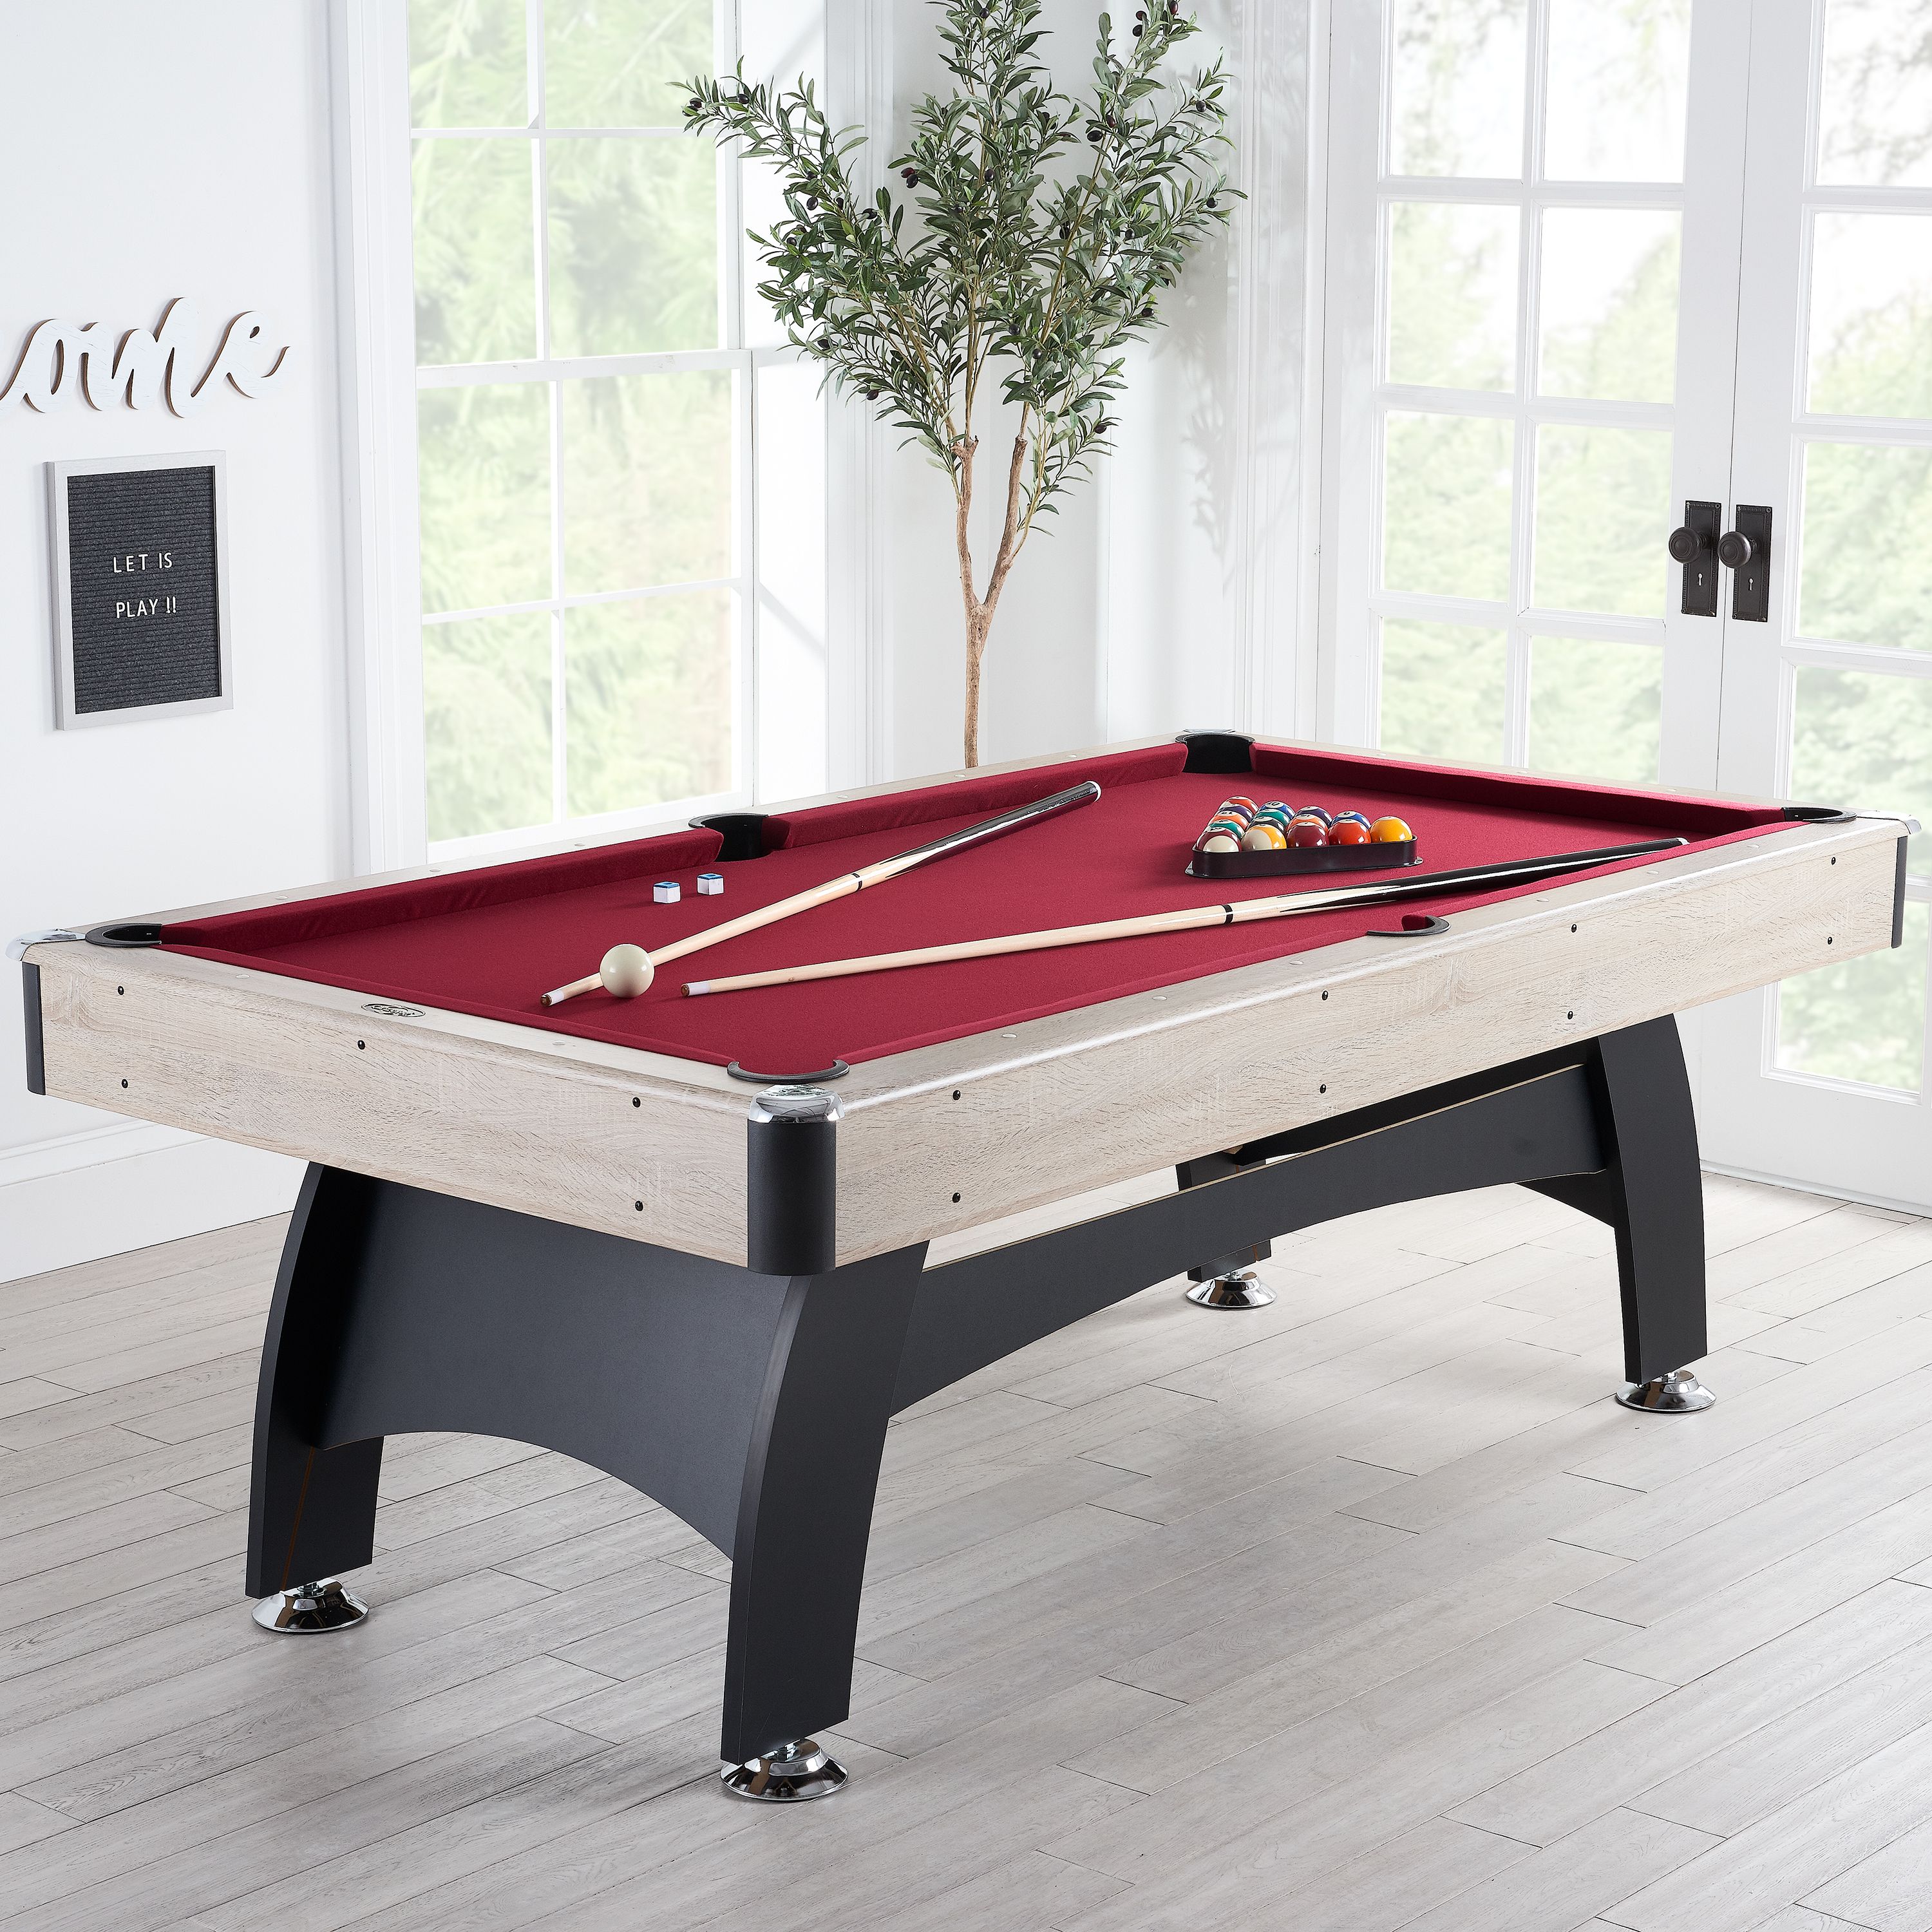 Airzone 84" Pool Table with Accessories, Red Felt - image 2 of 4